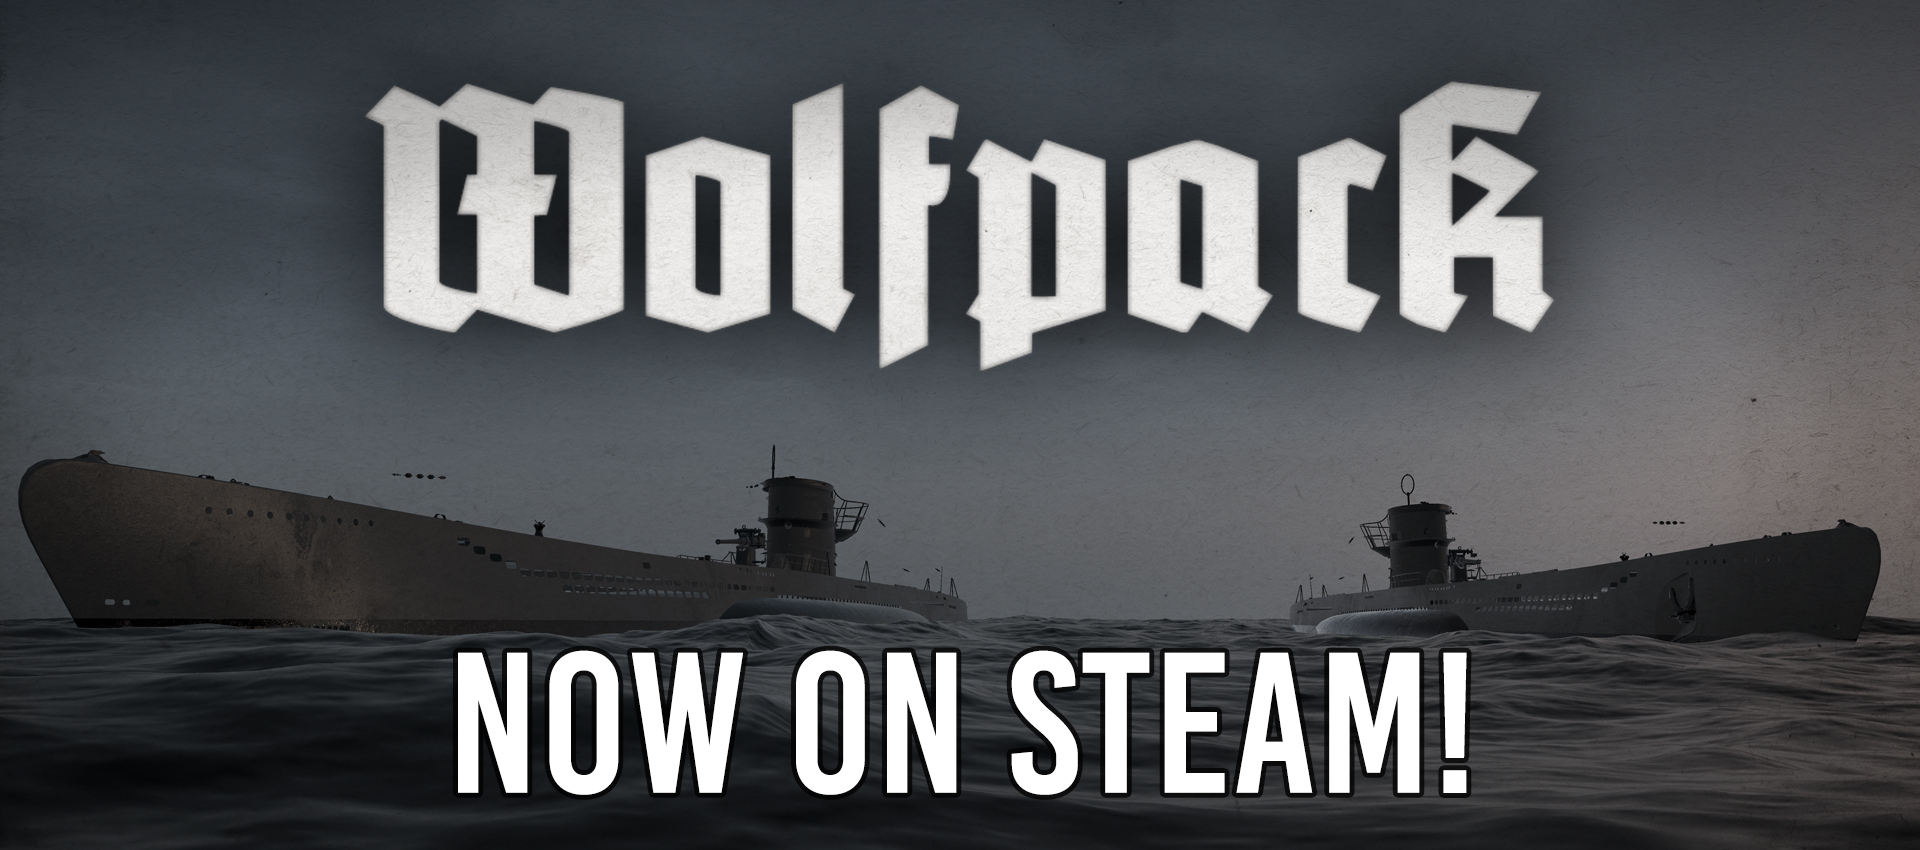 Steam Wolfpack Wolfpack is now available on Steam!